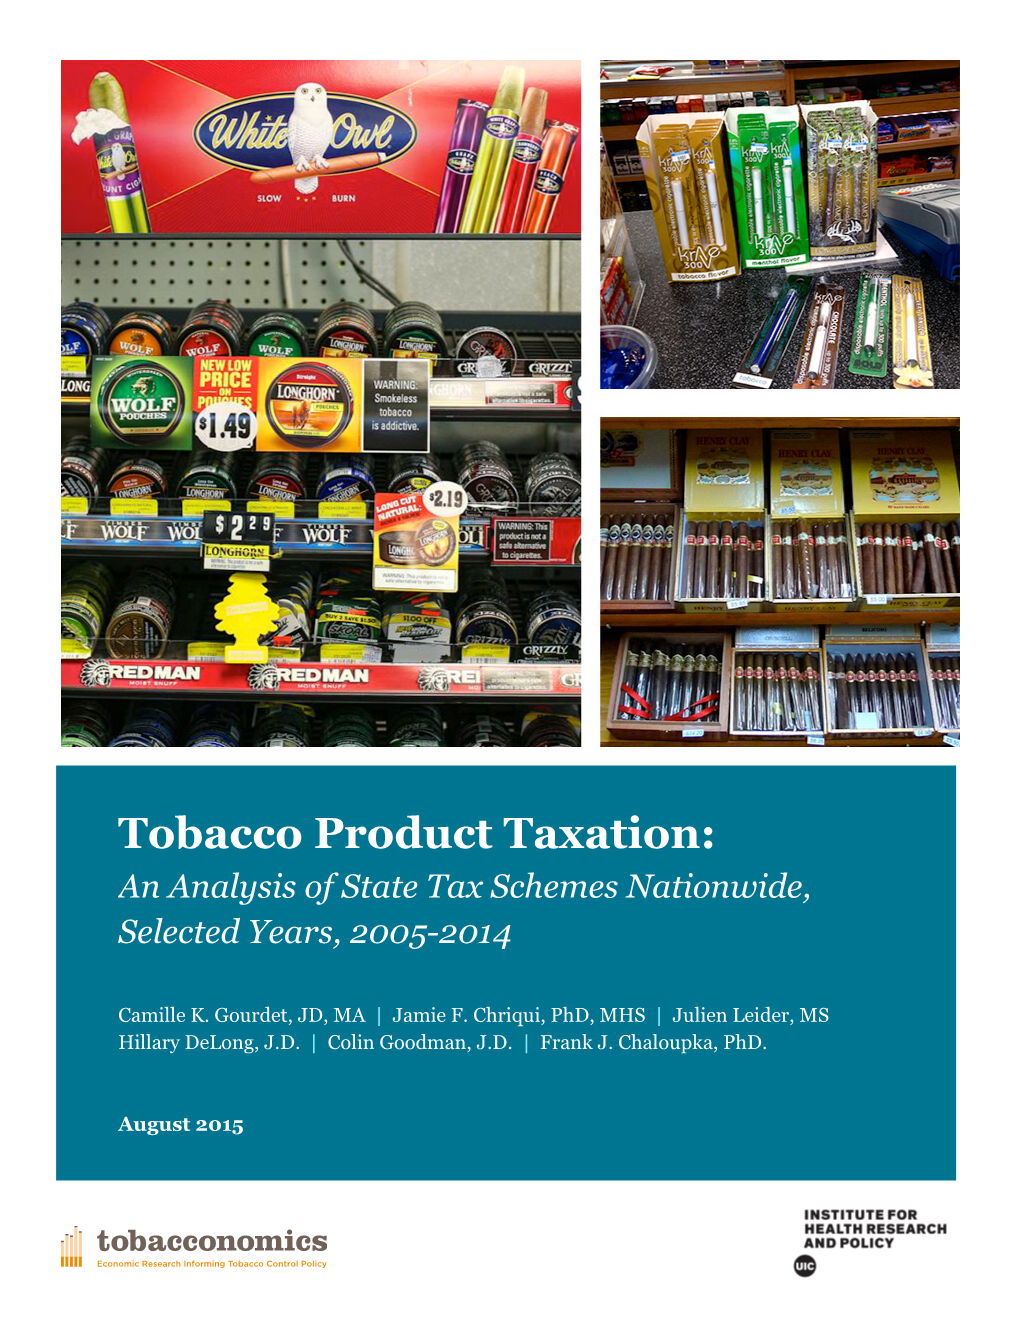 Tobacco Product Taxation: an Analysis of State Tax Schemes Nationwide, Selected Years, 2005-2014